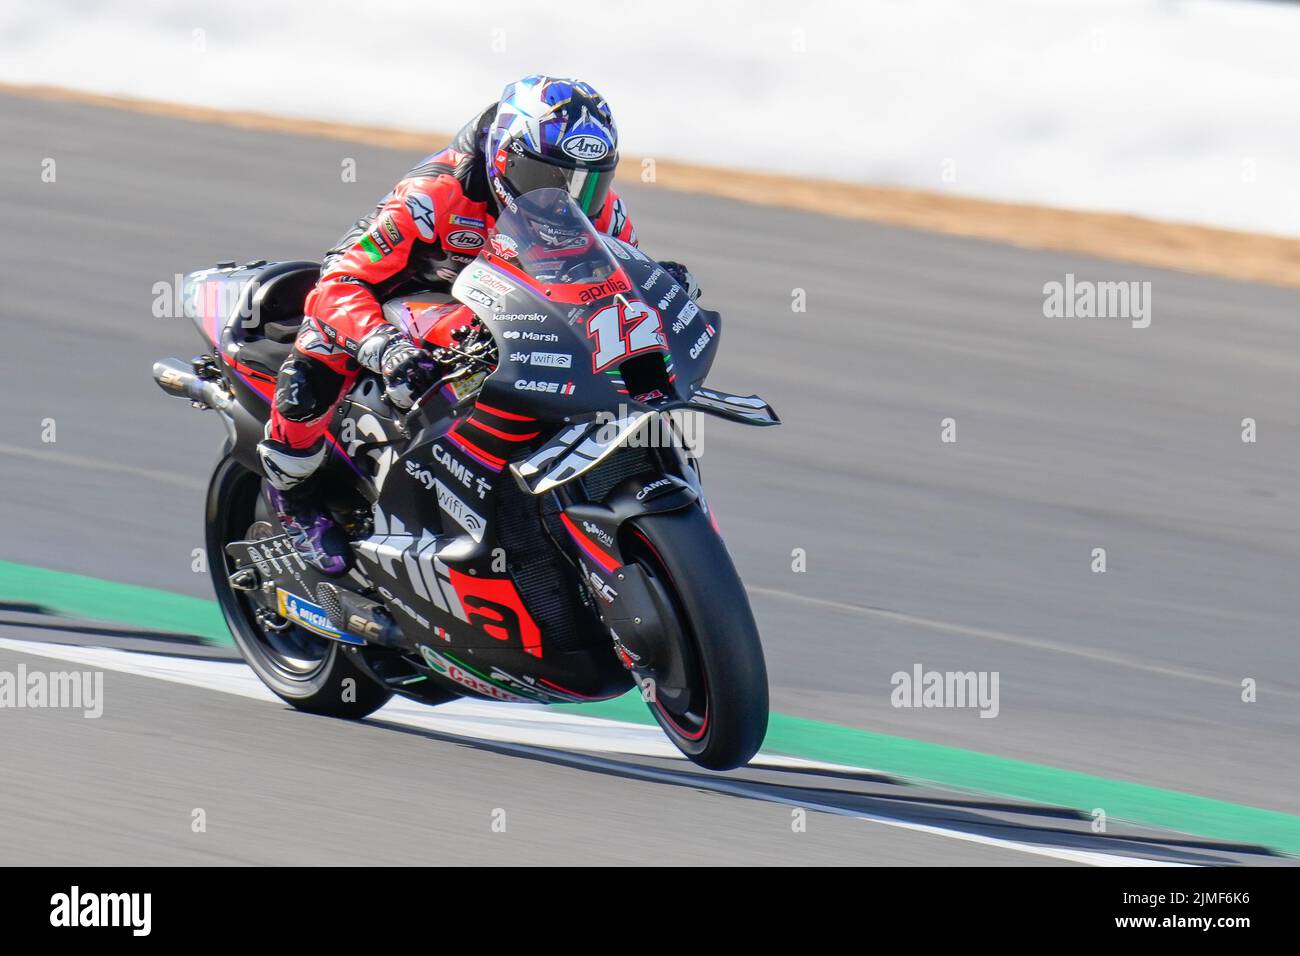 Towcester, UK. 06th Aug, 2022. Maverick VINALES (Spain) of the Aprilia Racing Team during the 2022 Monster Energy Grand Prix MotoGP Free Practice 3 session at Silverstone Circuit, Towcester, England on the 6th August 2022. Photo by David Horn. Credit: PRiME Media Images/Alamy Live News Stock Photo